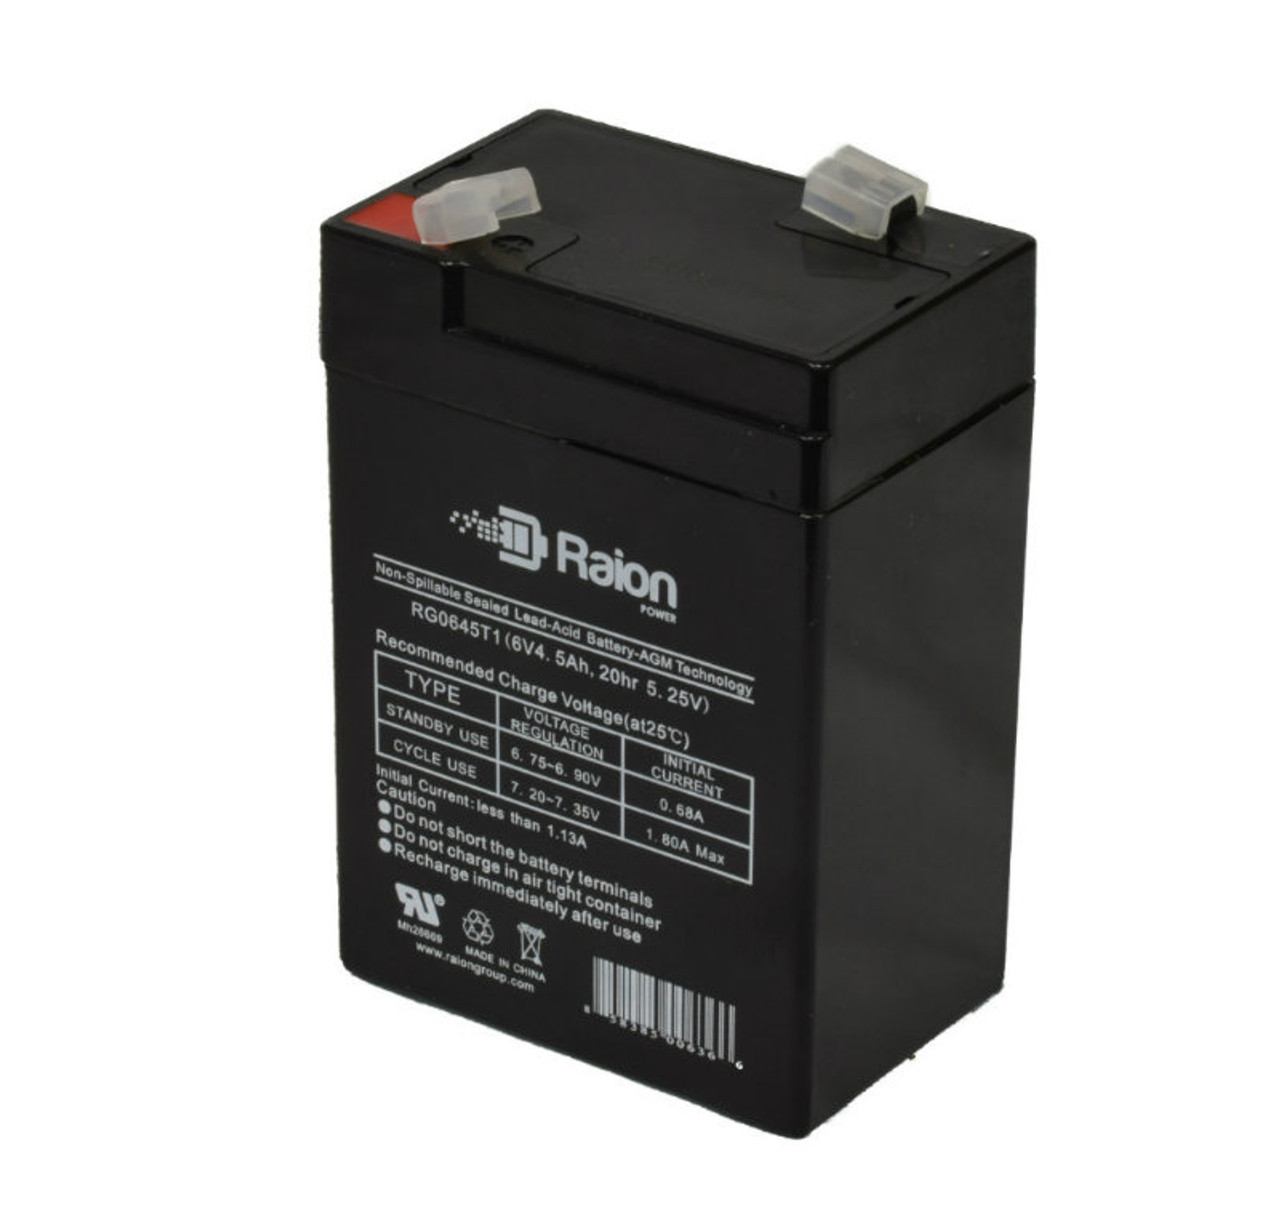 Raion Power RG0645T1 6V 4.5Ah Replacement Battery Cartridge for Criticare Systems 506 Pulse Oximeter